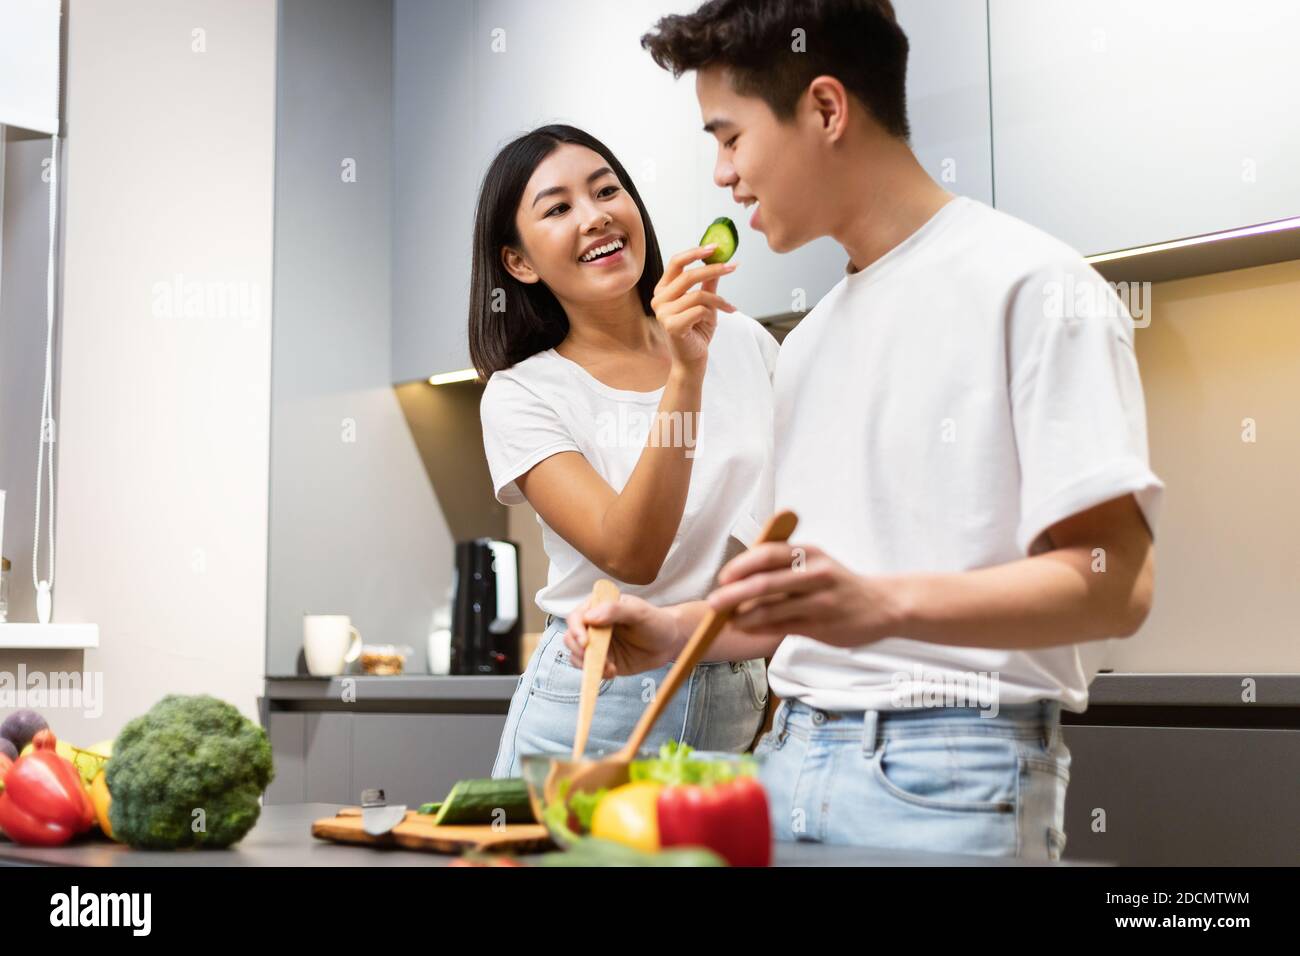 Japanese Couple Tasting Food While Cooking Dinner Together In Kitchen Stock Photo